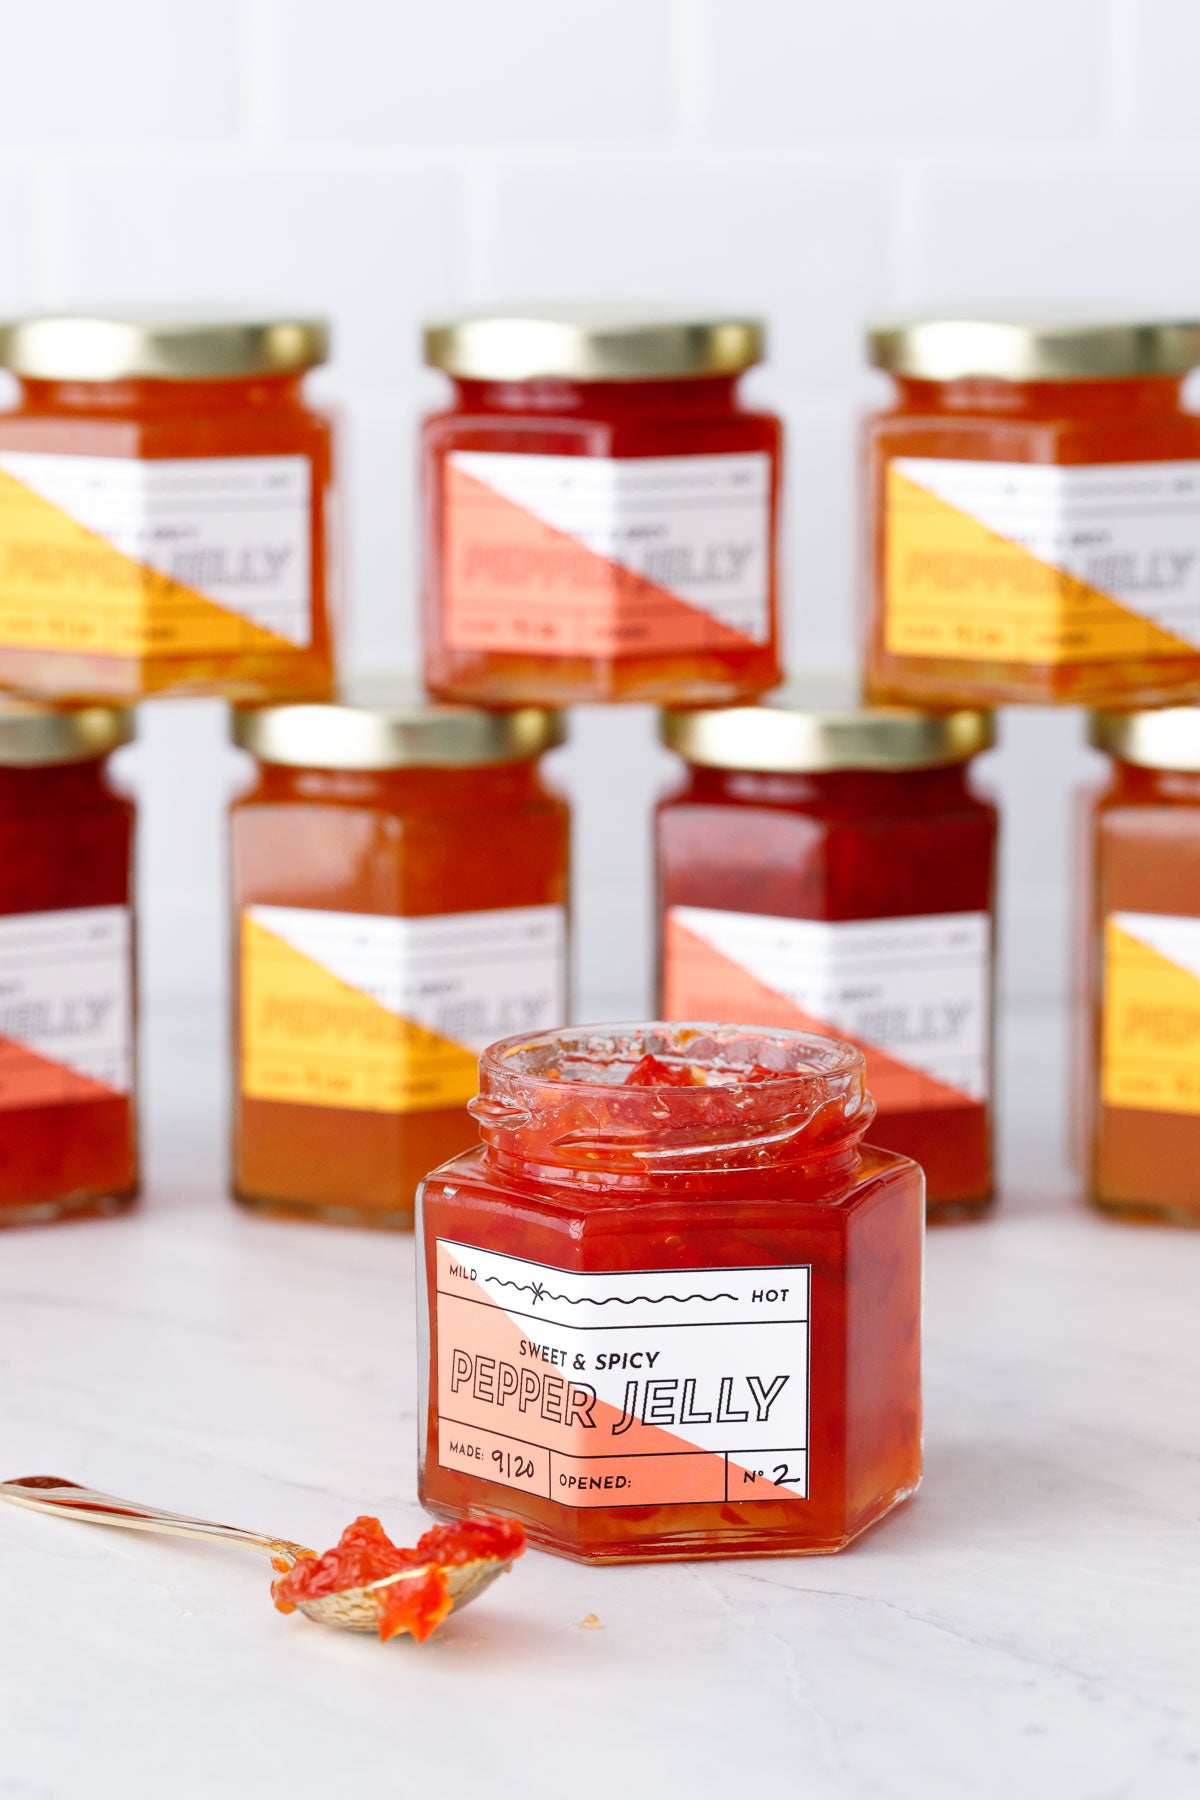 Pepper Jelly Label Template